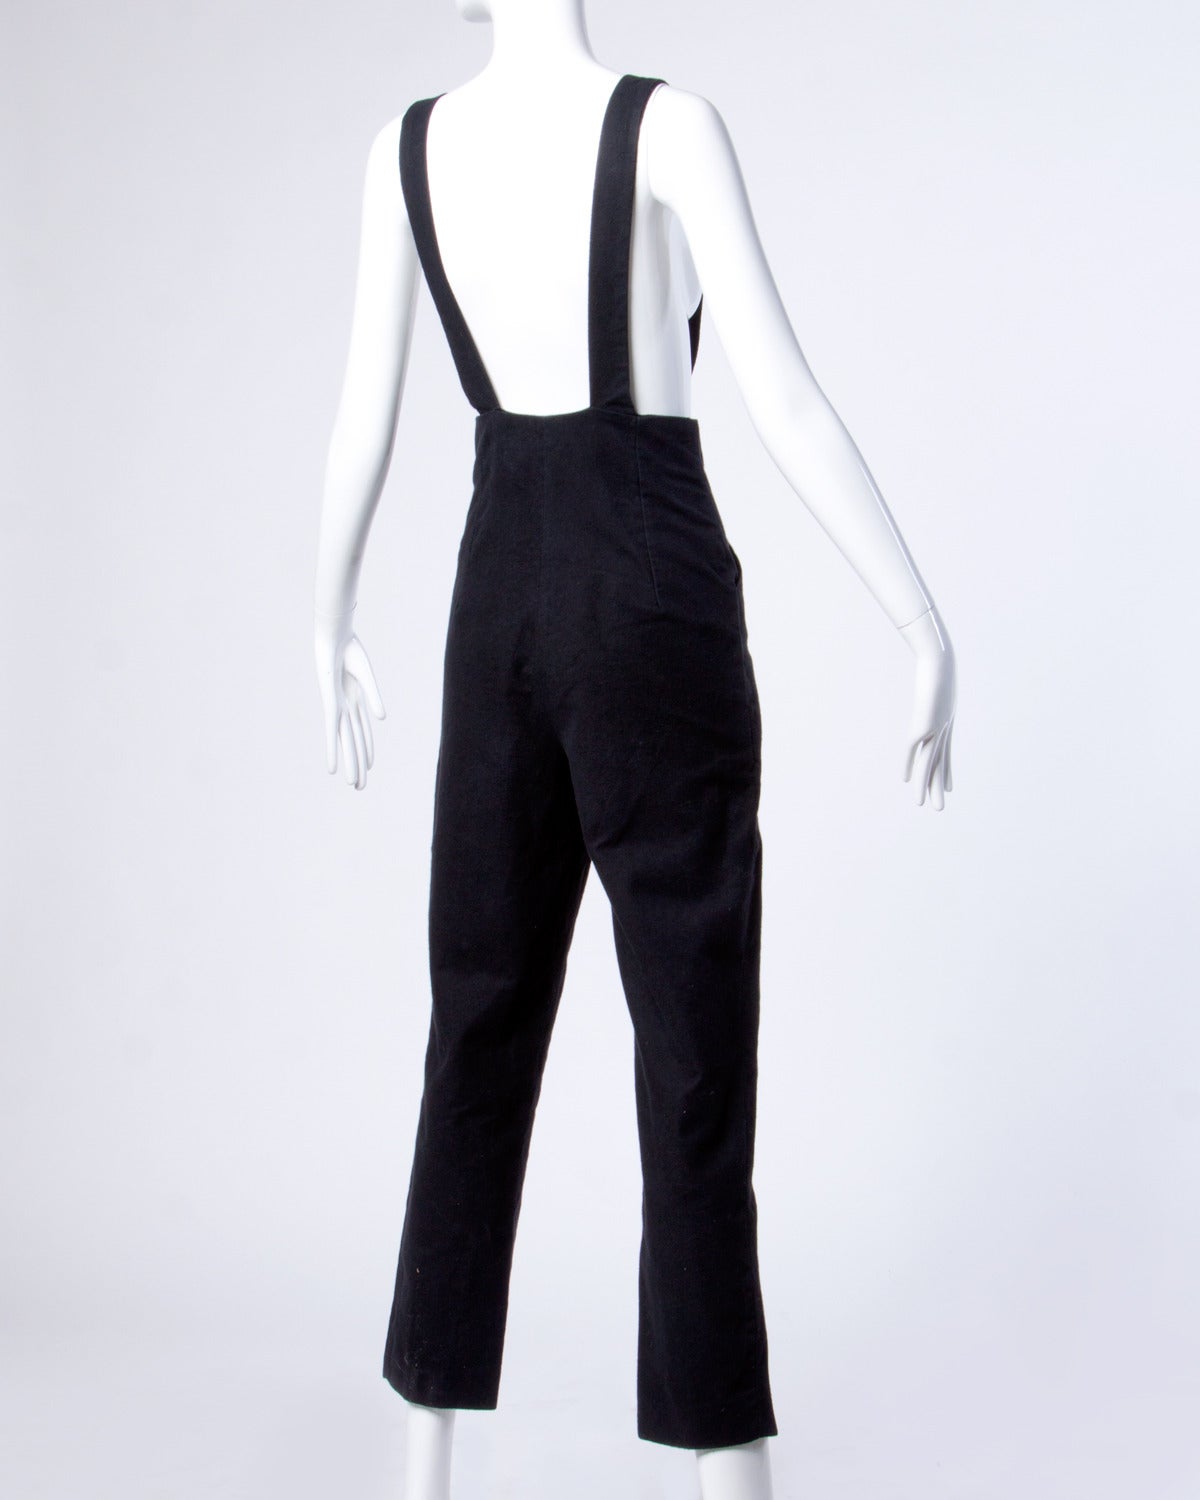 Incredible black overall jumpsuit by Marina Sitbon for Kamosho. Rare iconic 90s label is hard to find. Versace-inspired heavy goldtone and black buttons and hardware. High waist and adjustable straps.

Details:

Unlined
Side Pockets
Front